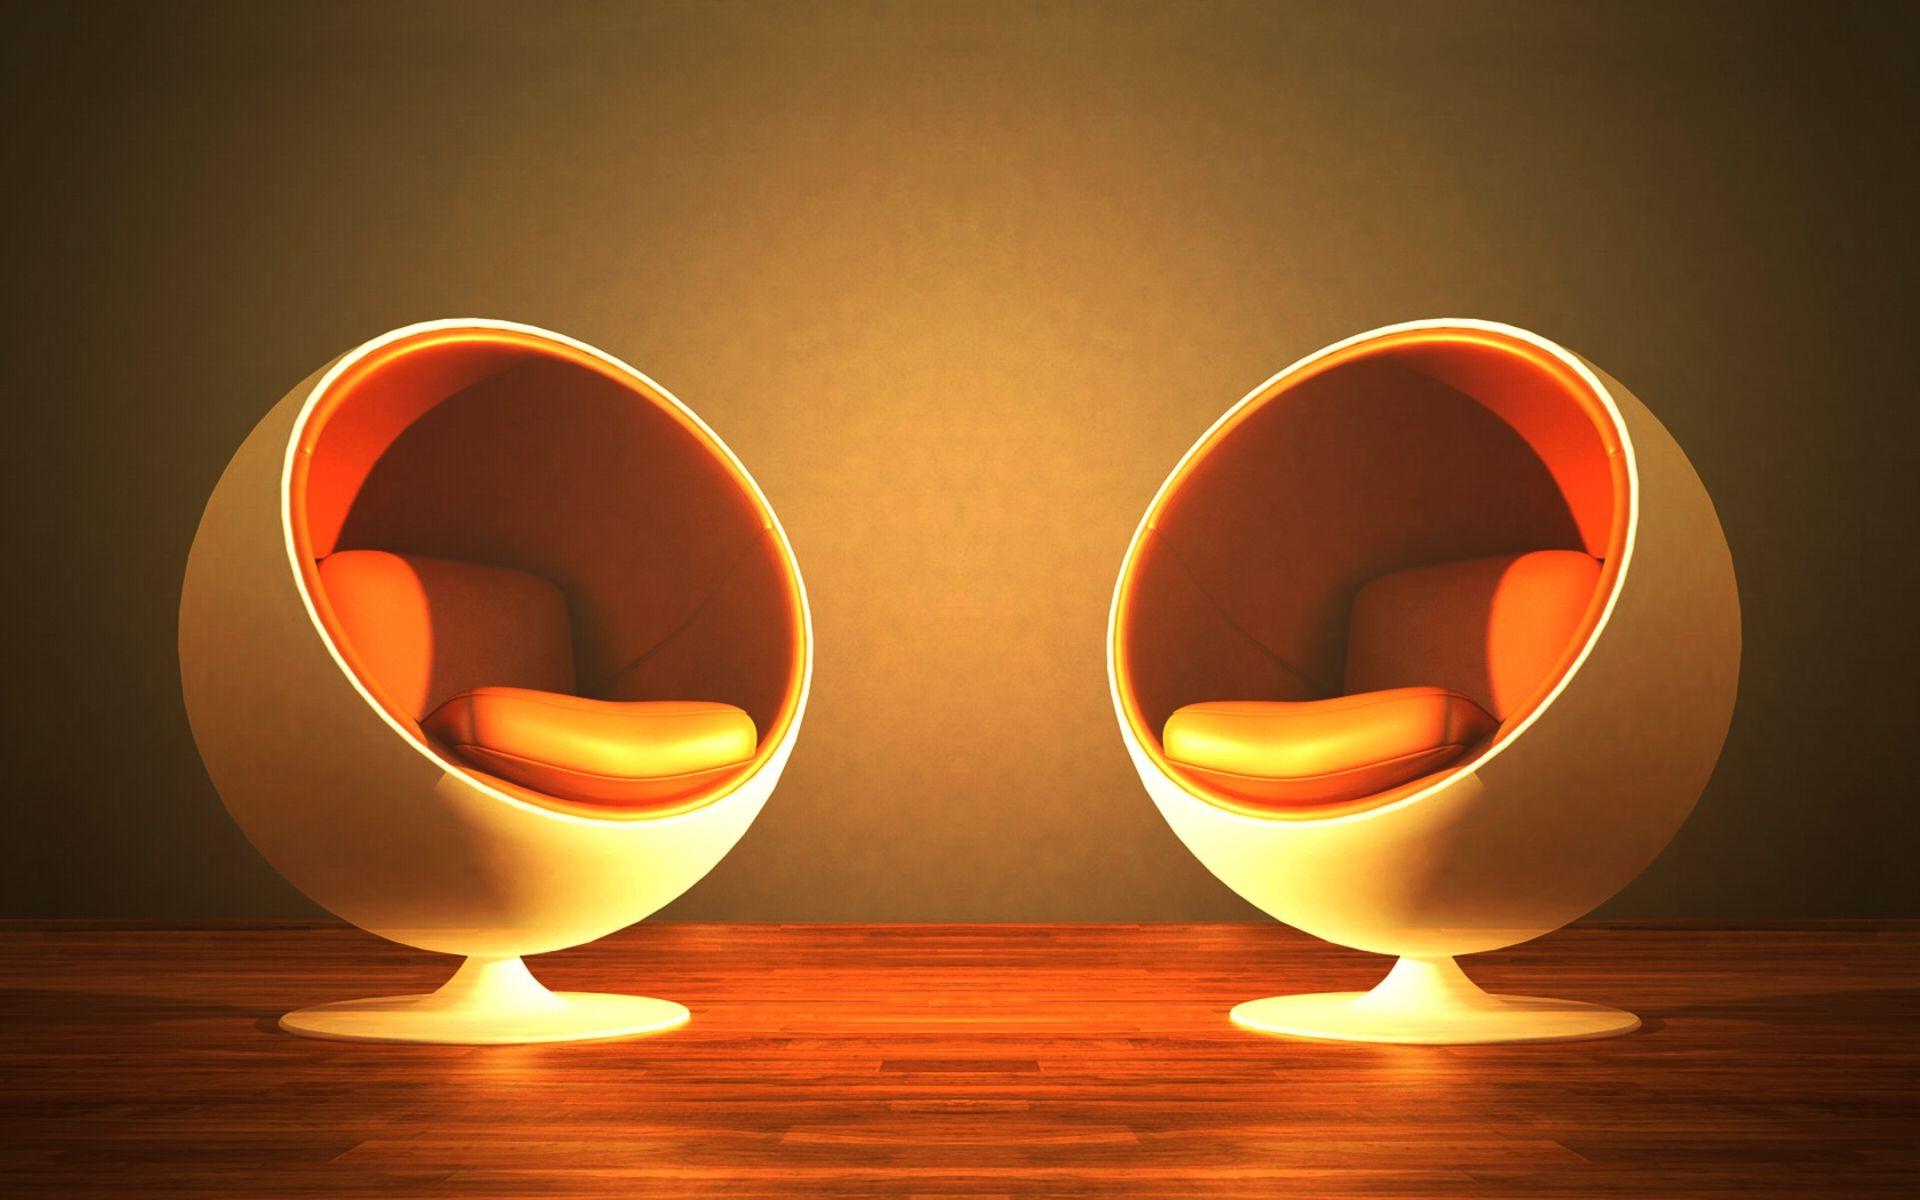 Download the Circle Chairs Wallpaper, Circle Chairs iPhone